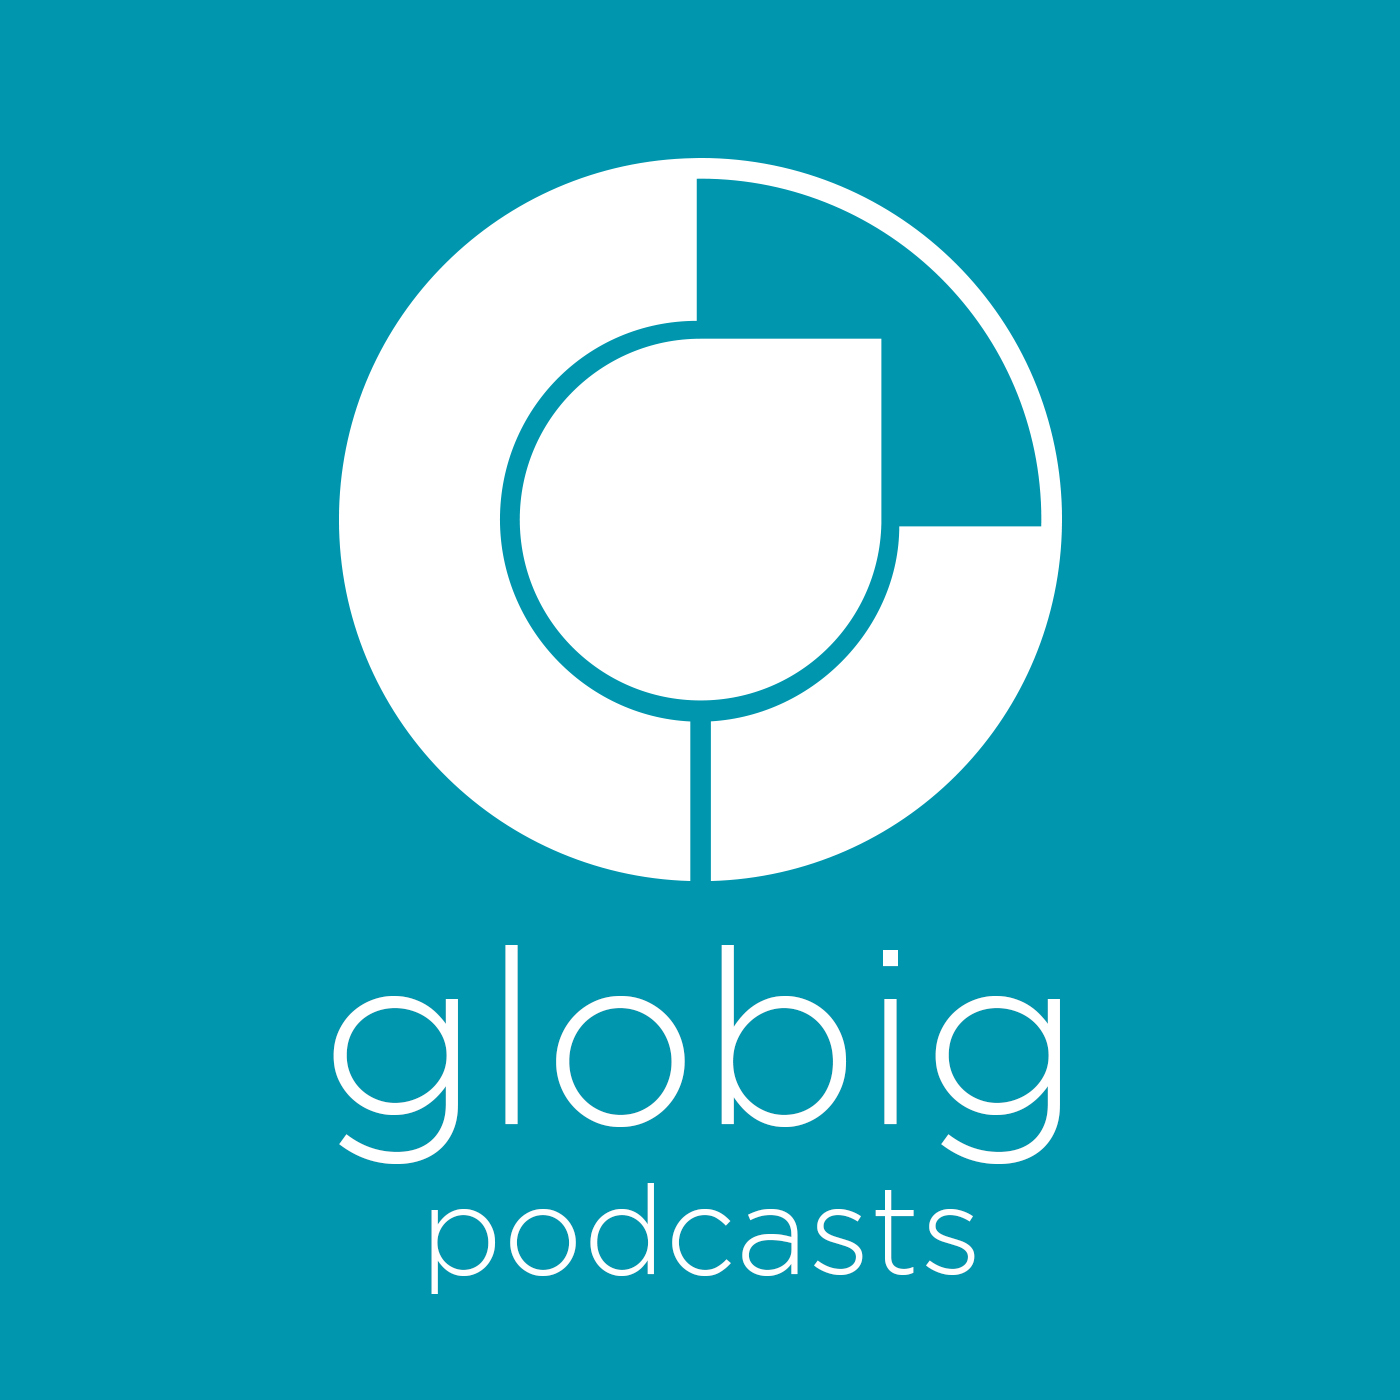 Global Growth Podcast - powered by Globig